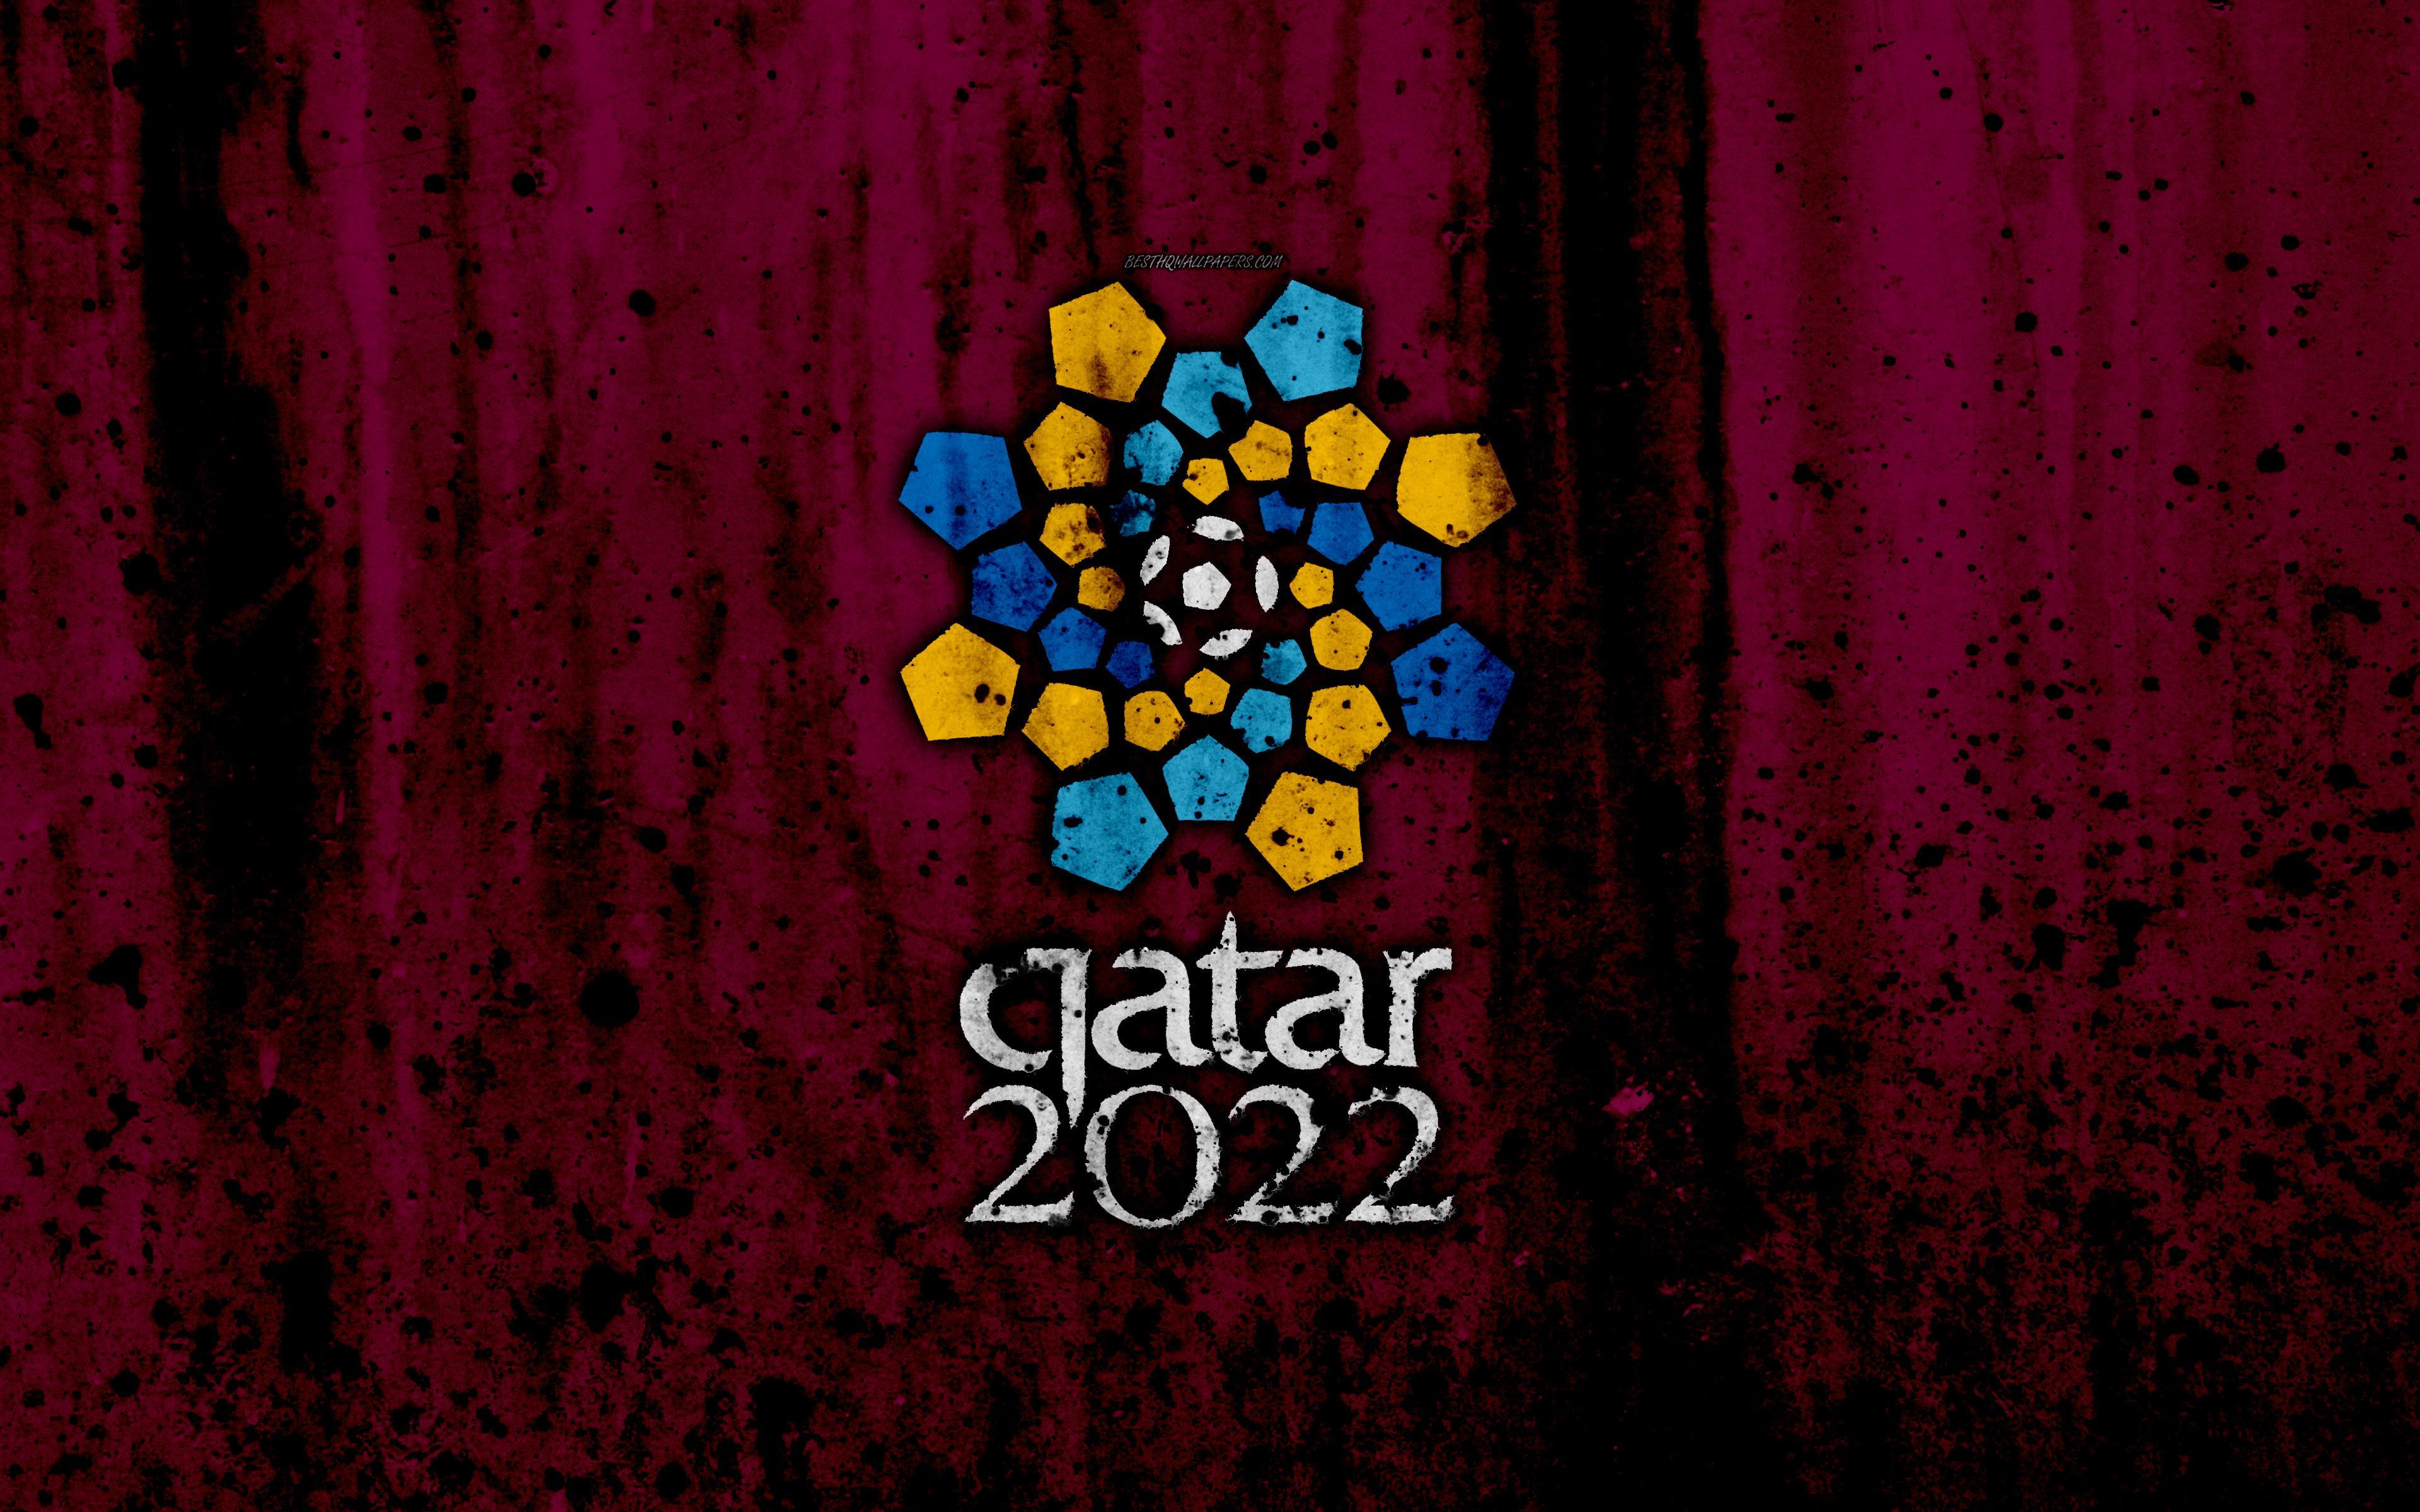 Download wallpaper Qatar 2022 FIFA World Cup, 4k, logo, grunge, Qatar maroon backgroud, 2022 FIFA World Cup for desktop with resolution 3840x2400. High Quality HD picture wallpaper